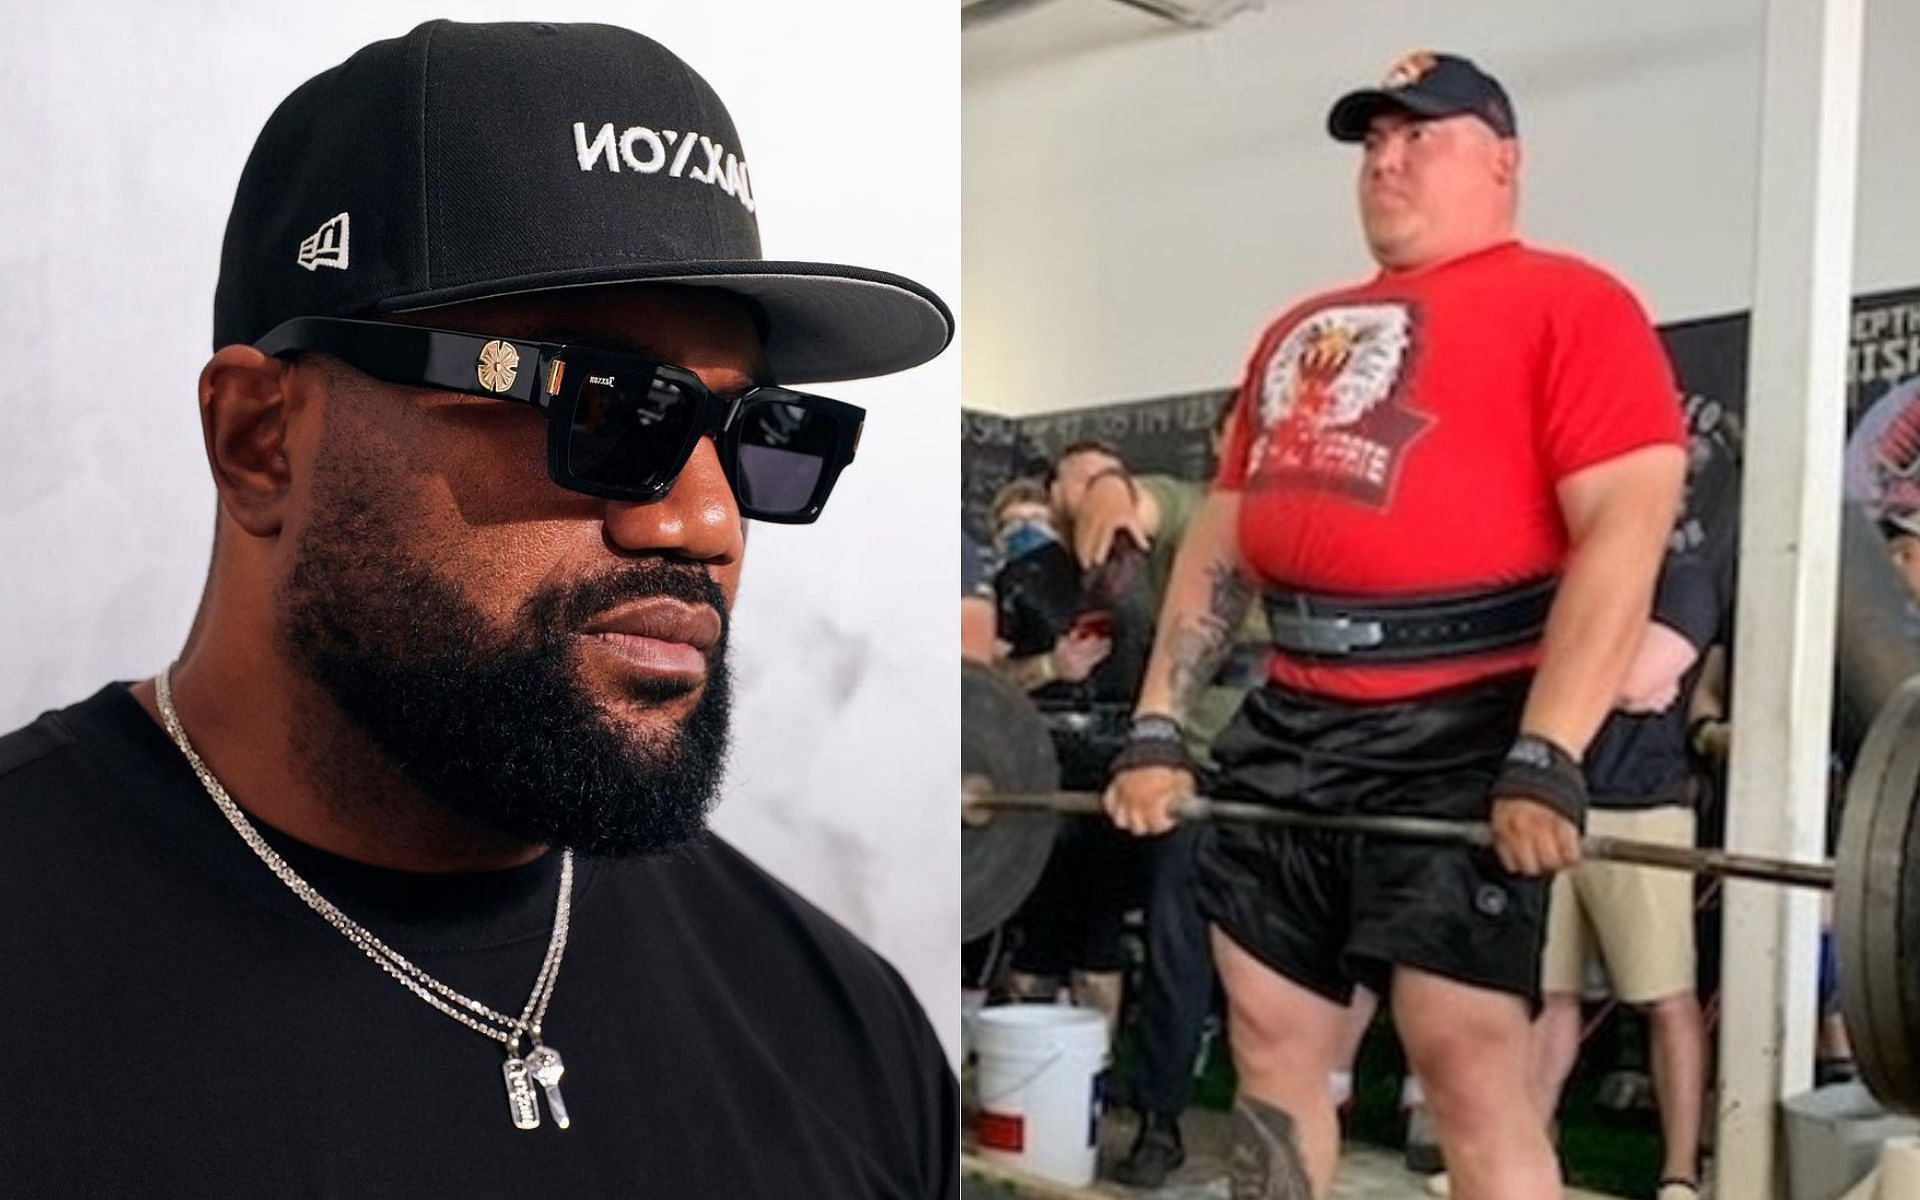 Rampage Jackson (left) and Darrill Schoonover (right) [Image credits: @rampage4real and @915big dog915 on Instagram]